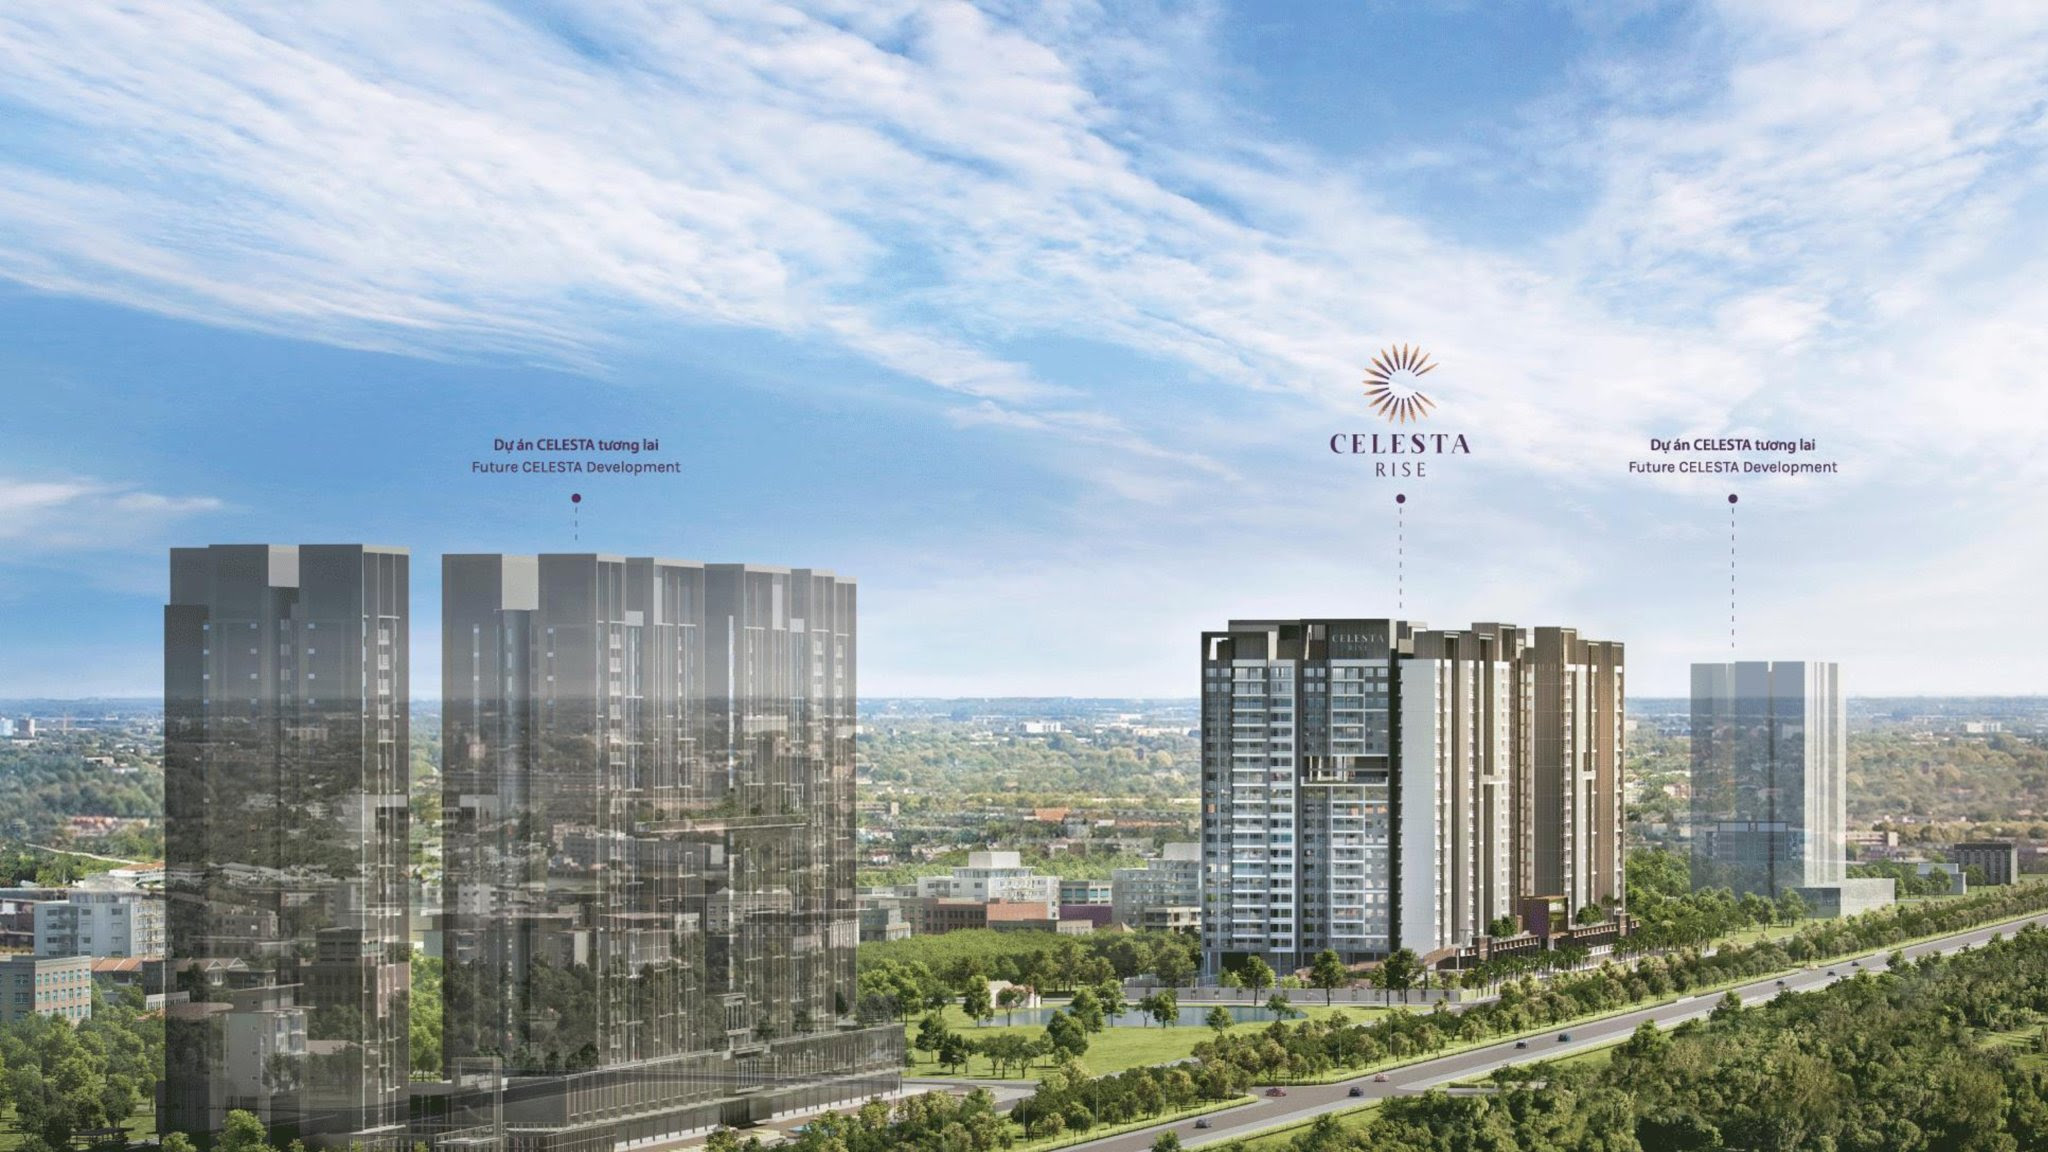 Celesta Rise, the first phase of Celesta City, Keppel Land & Phu Long complex on Nguyen Huu Tho street, Nha Be